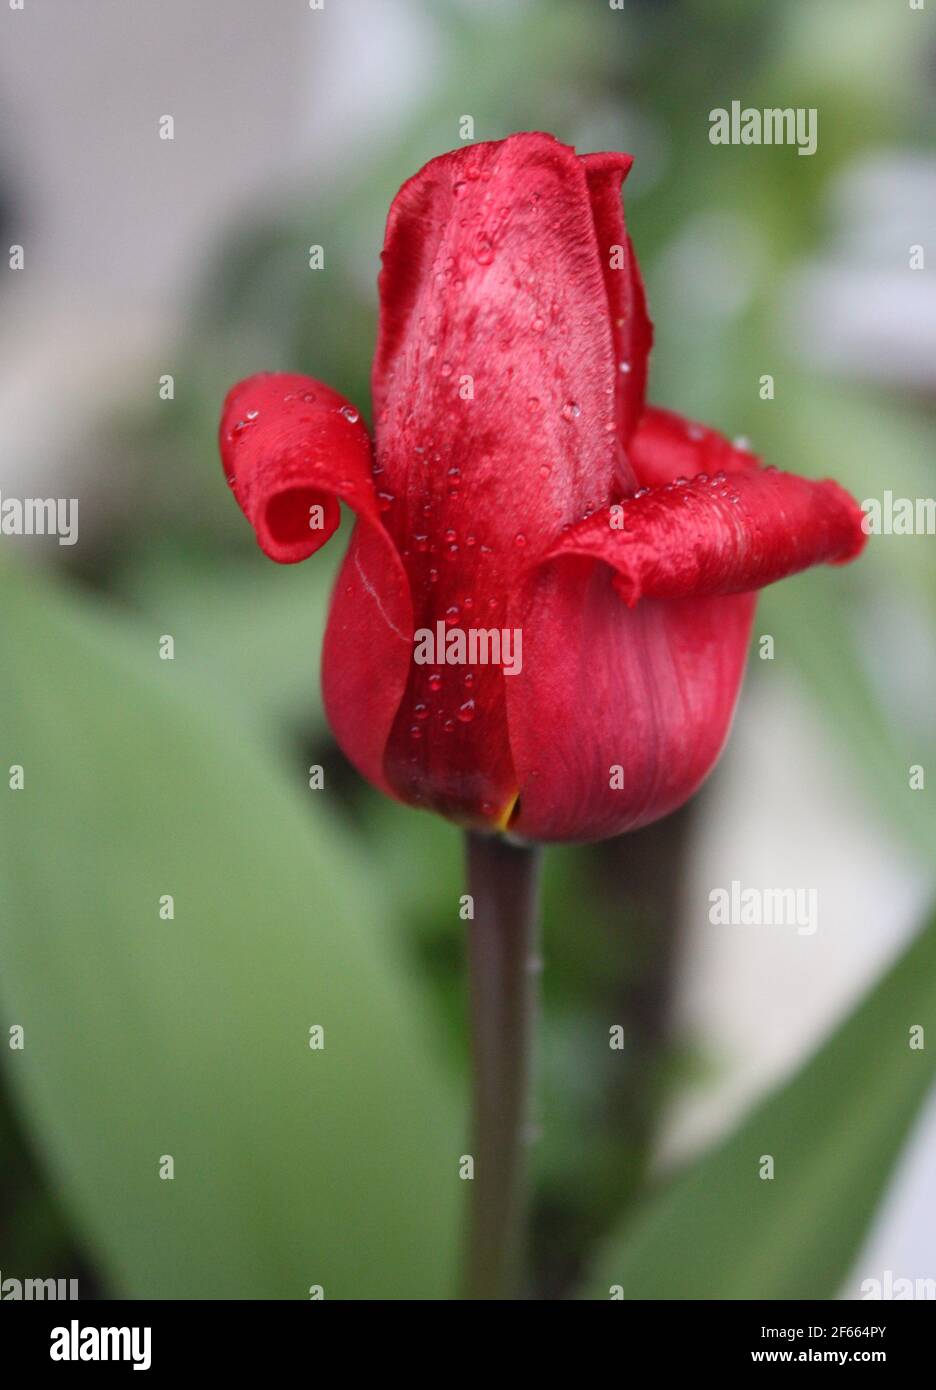 Close up red velvet tulip.Dew drops resting on red tulip petals. Velvet red tulip petals. Beautiful colourful spring flowers. Love spring, love nature. Stock Photo